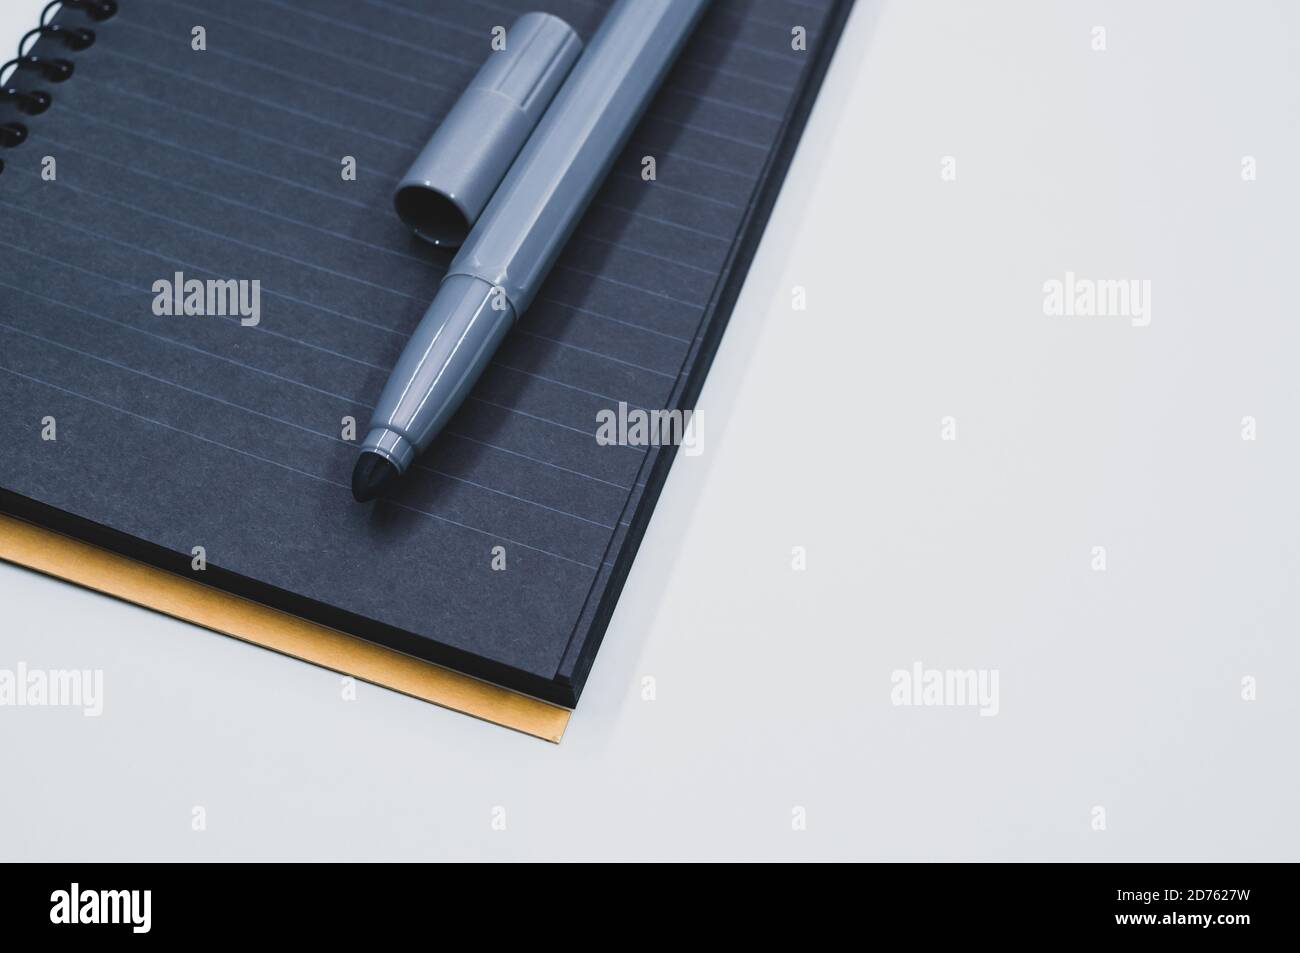 High angle shot of a black notebook and a marker on a blue surface Stock Photo